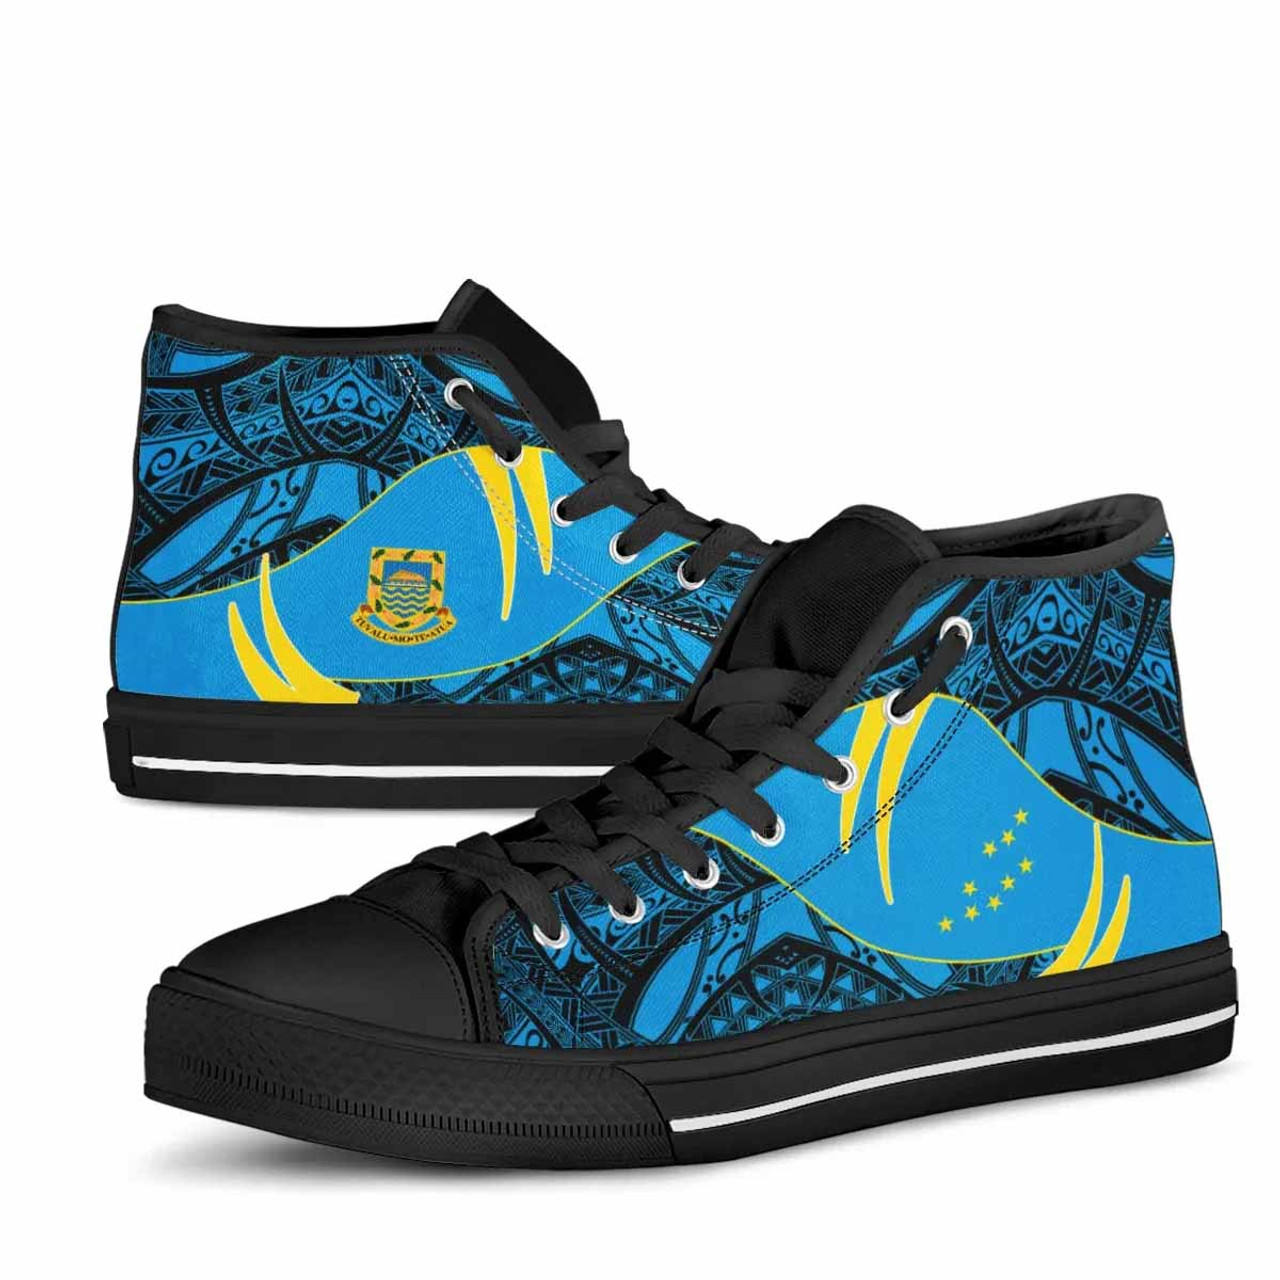 Tuvalu High Top Shoes - Symmetrical Lines 3